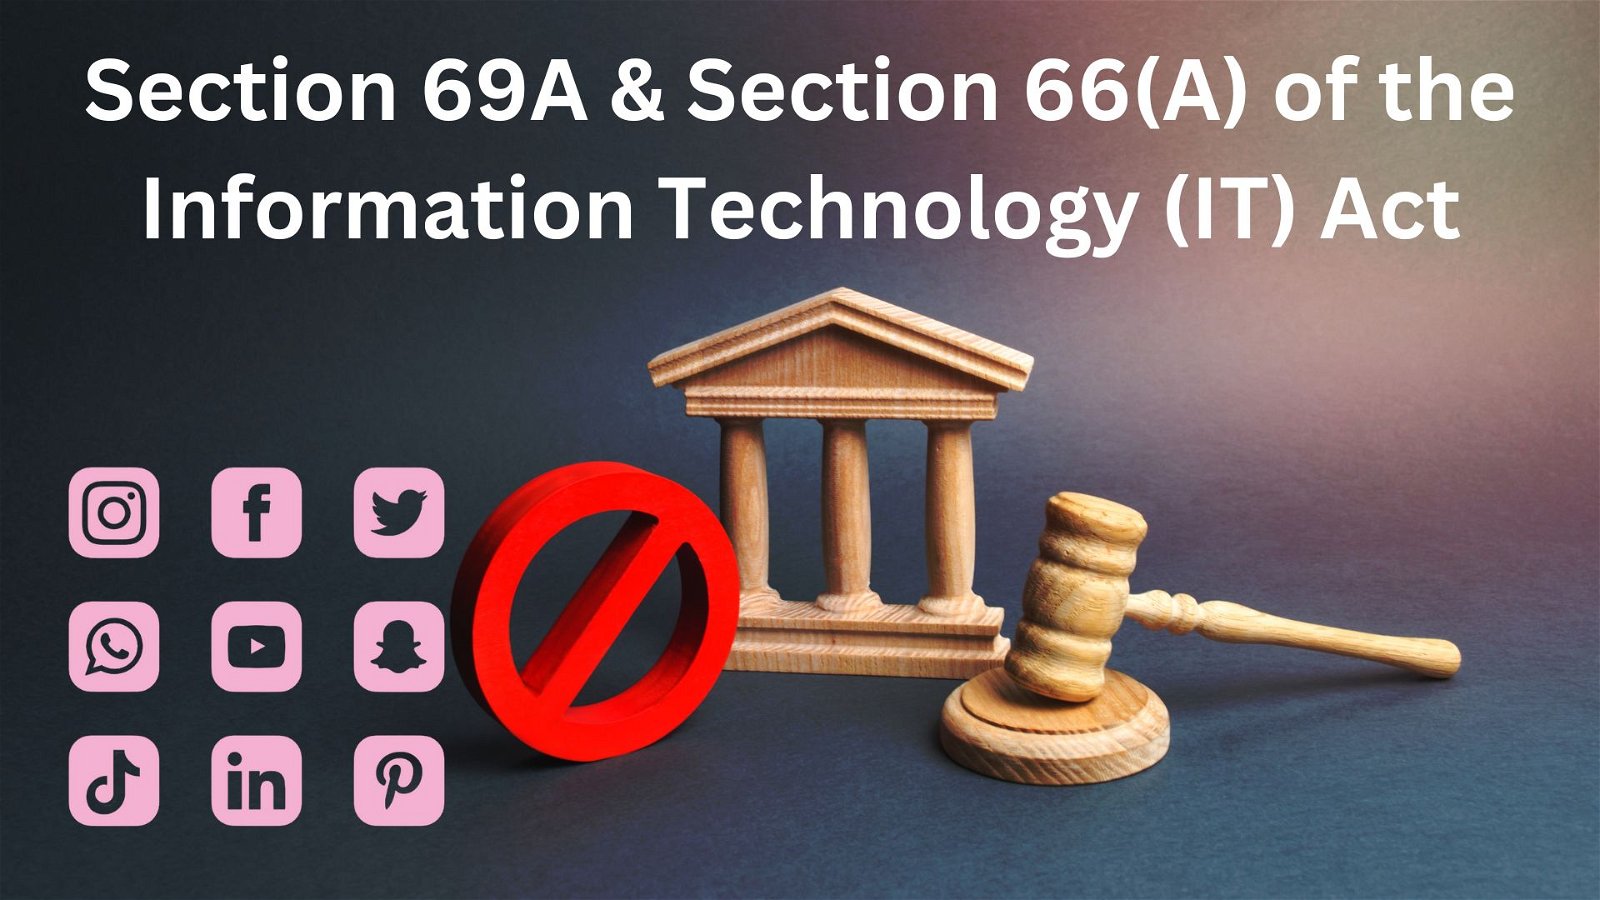 Section A & Section (A) of the Information Technology (IT) Act